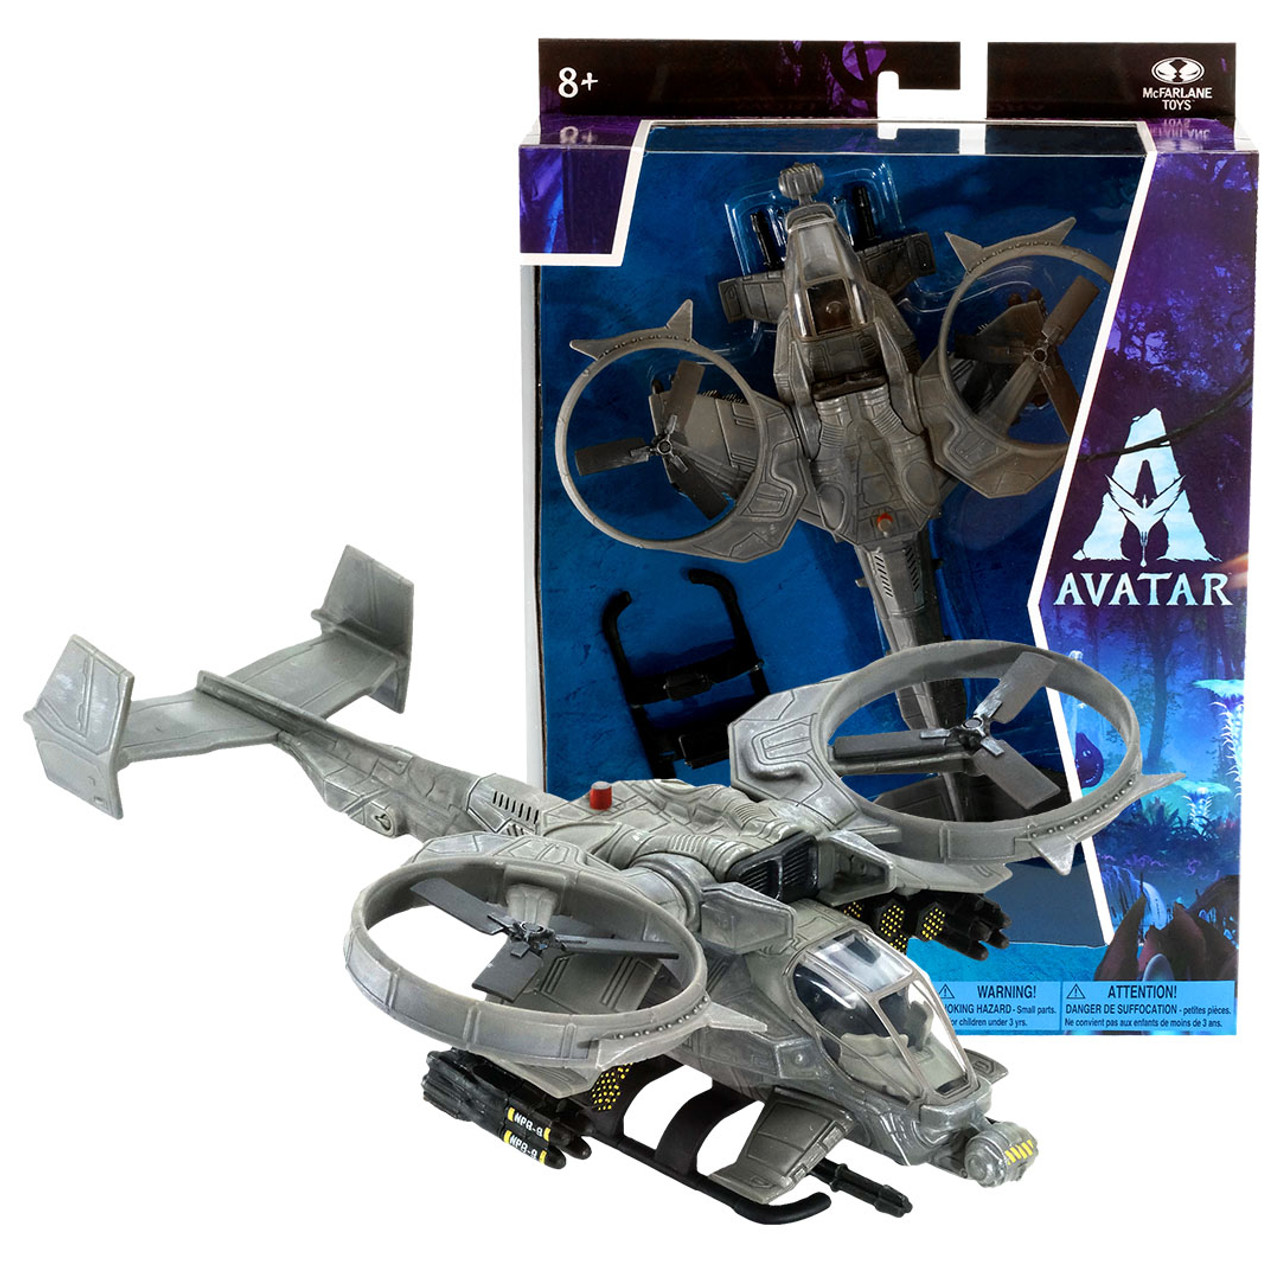 Avatar Movie Collectible Figures Complete Set $99.99- $149.99